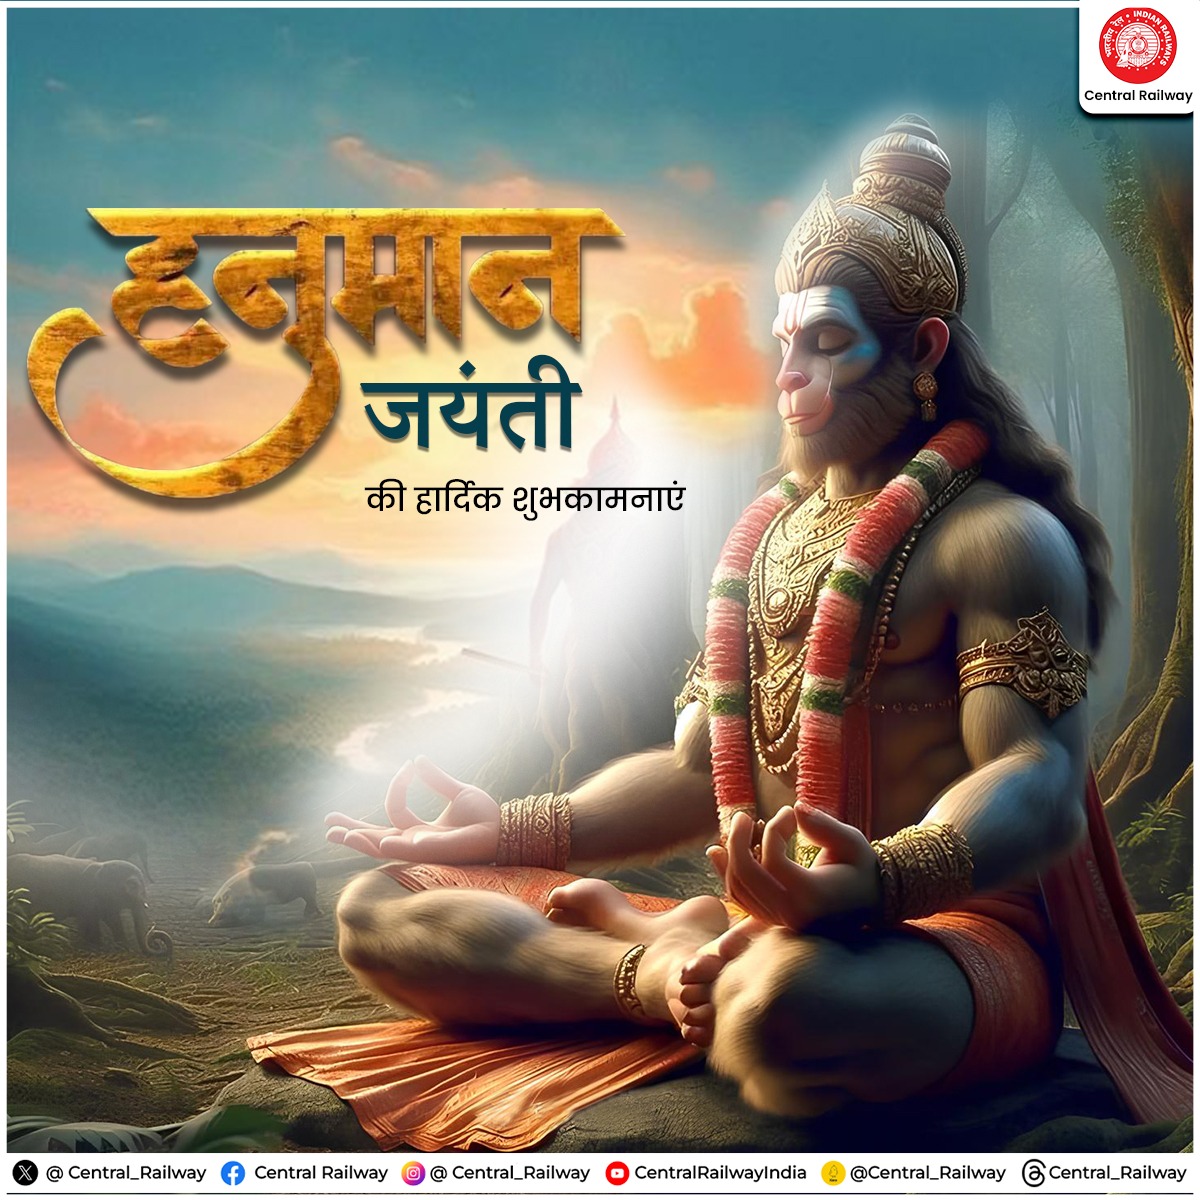 May the divine blessings of Lord Hanuman fill your life with strength, courage, and devotion. Happy Hanuman Jayanti! #HanumanJayanti